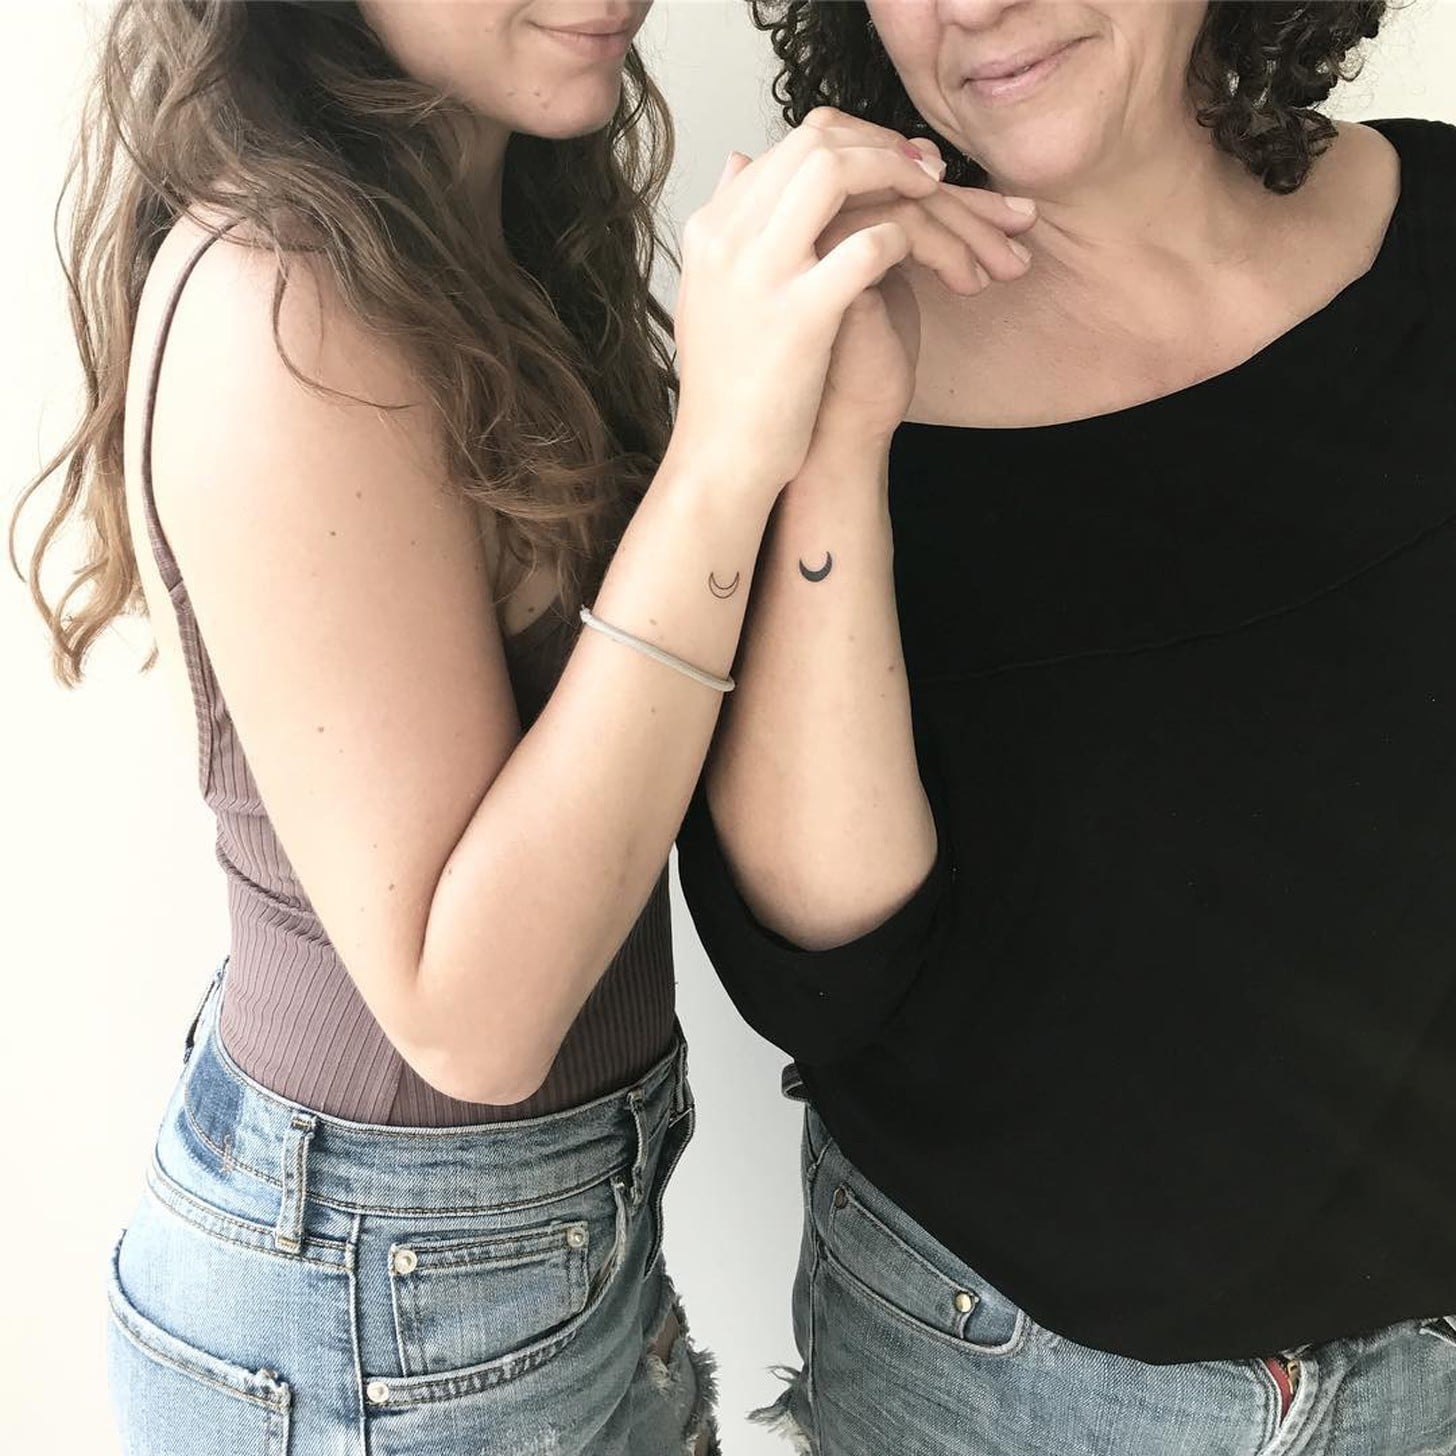 10 Minimalist MotherDaughter Tattoo Ideas to Try Out